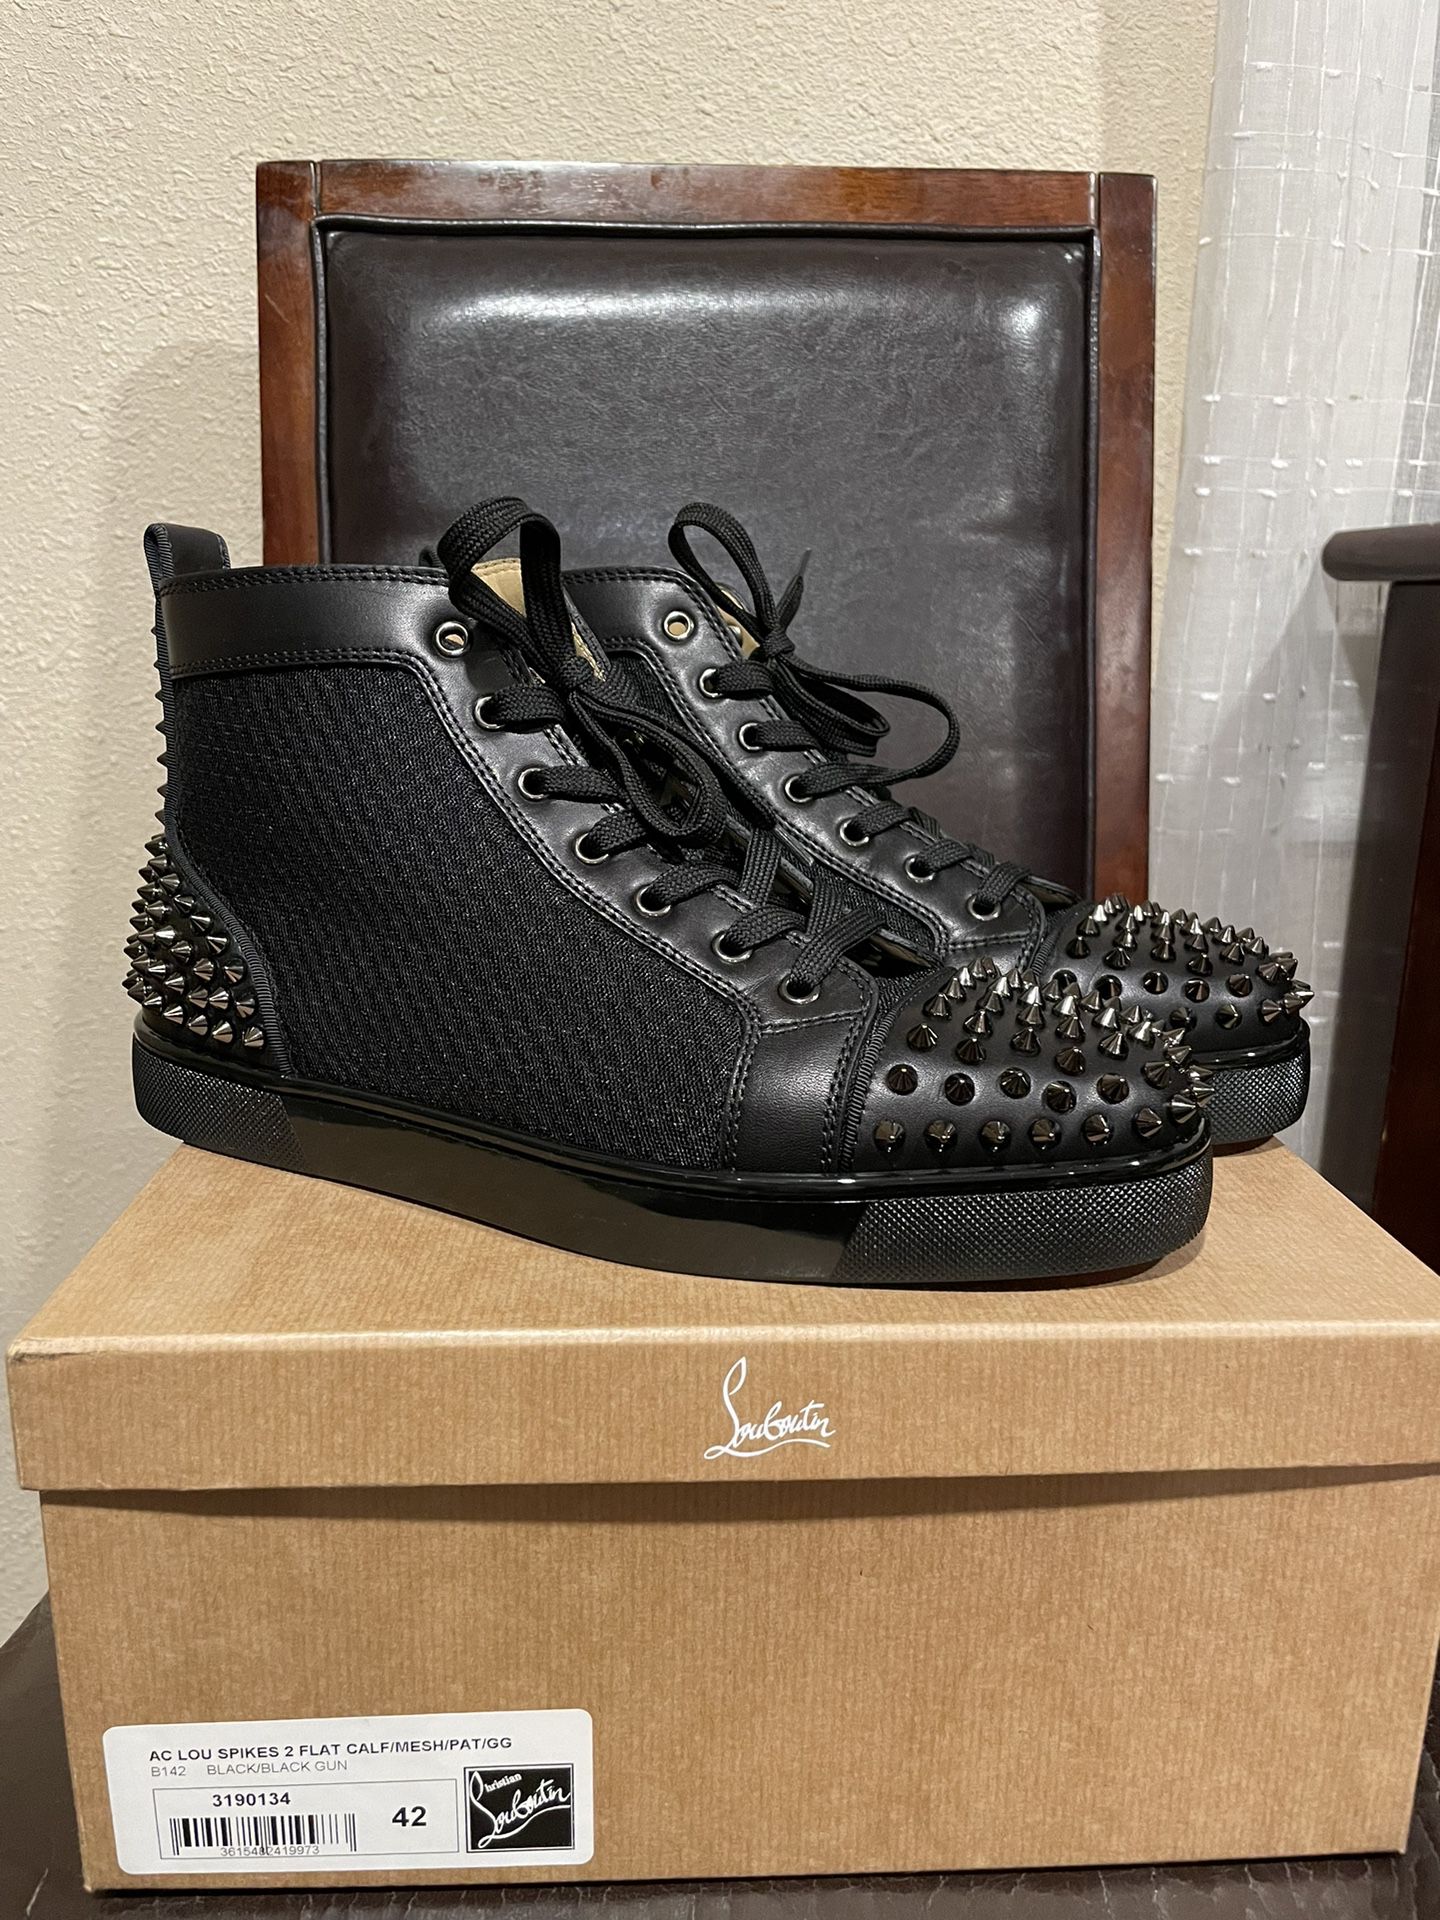 Lou Spikes